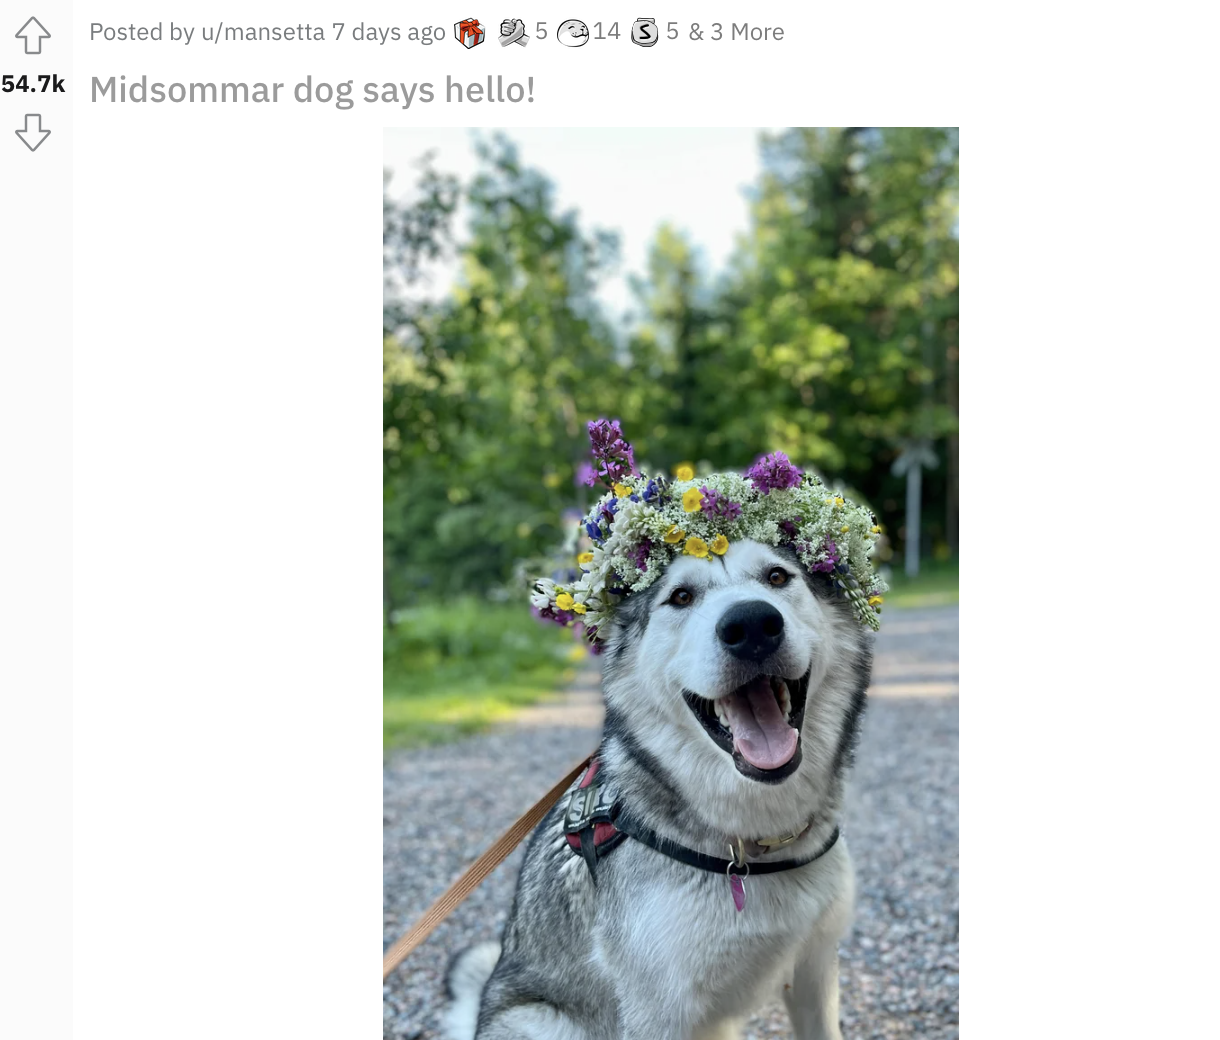 a husky with a flower crown